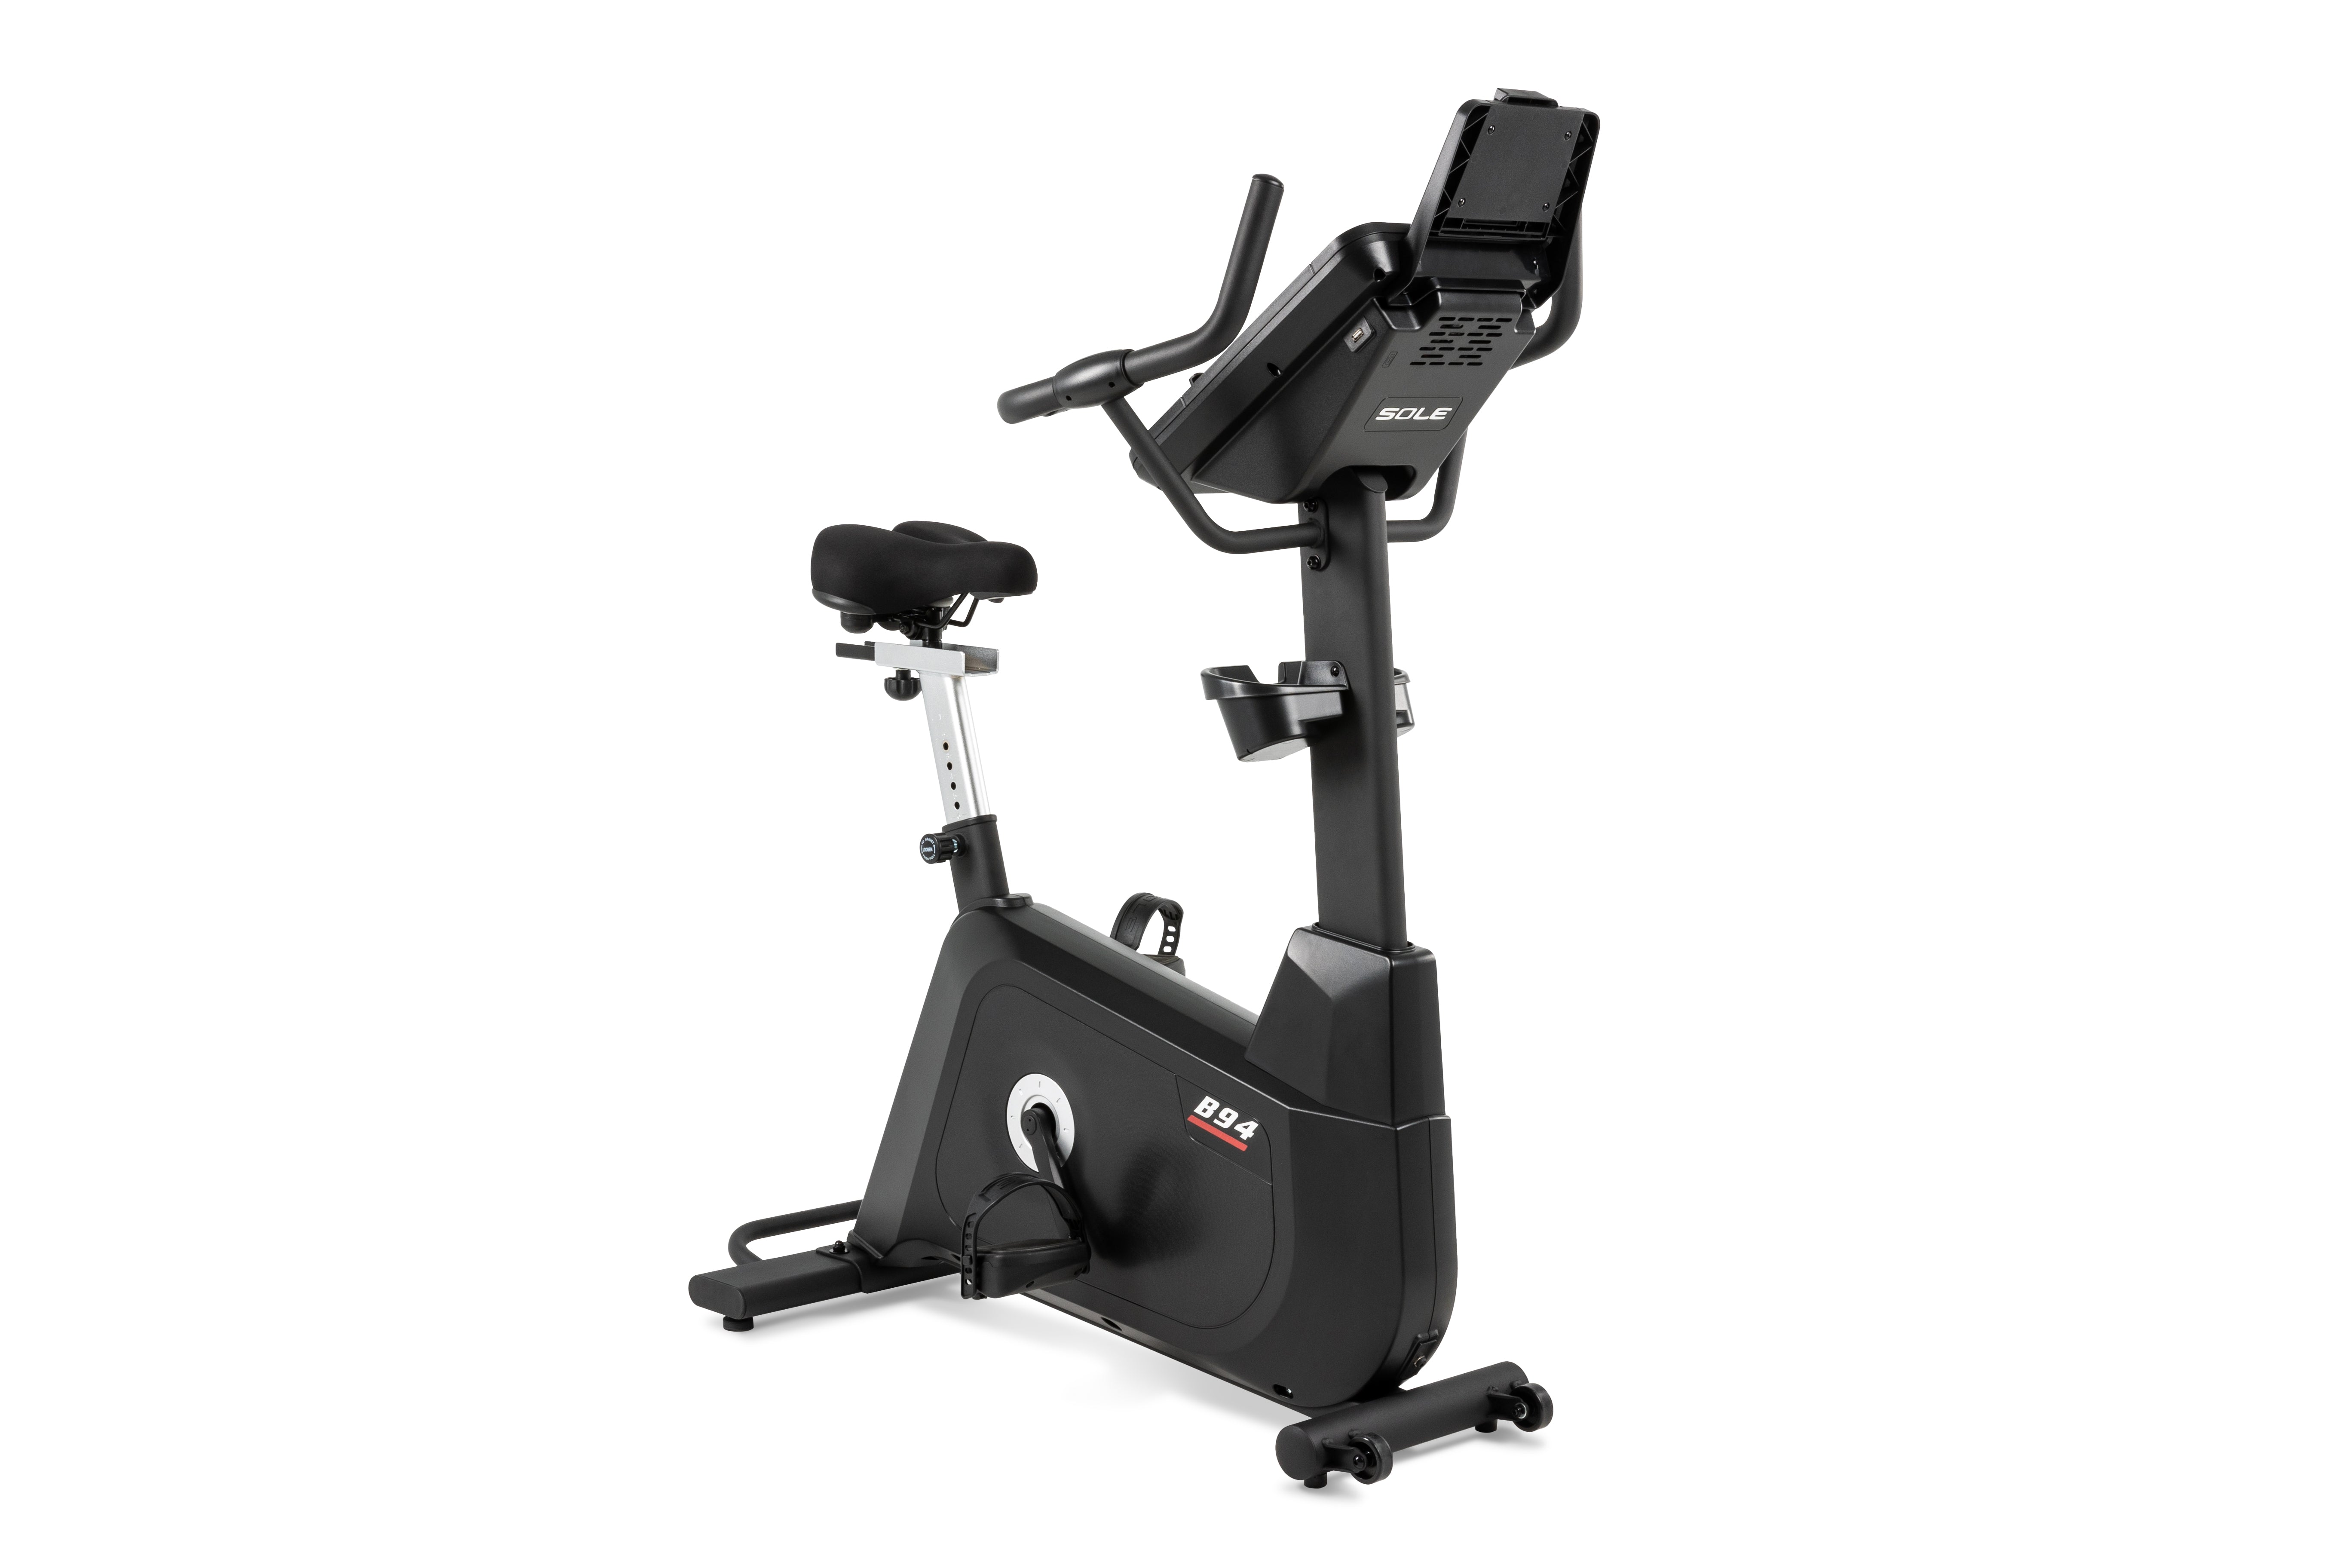 Sole B94 upright exercise bike with a prominent digital console, adjustable black seat, and sturdy frame.